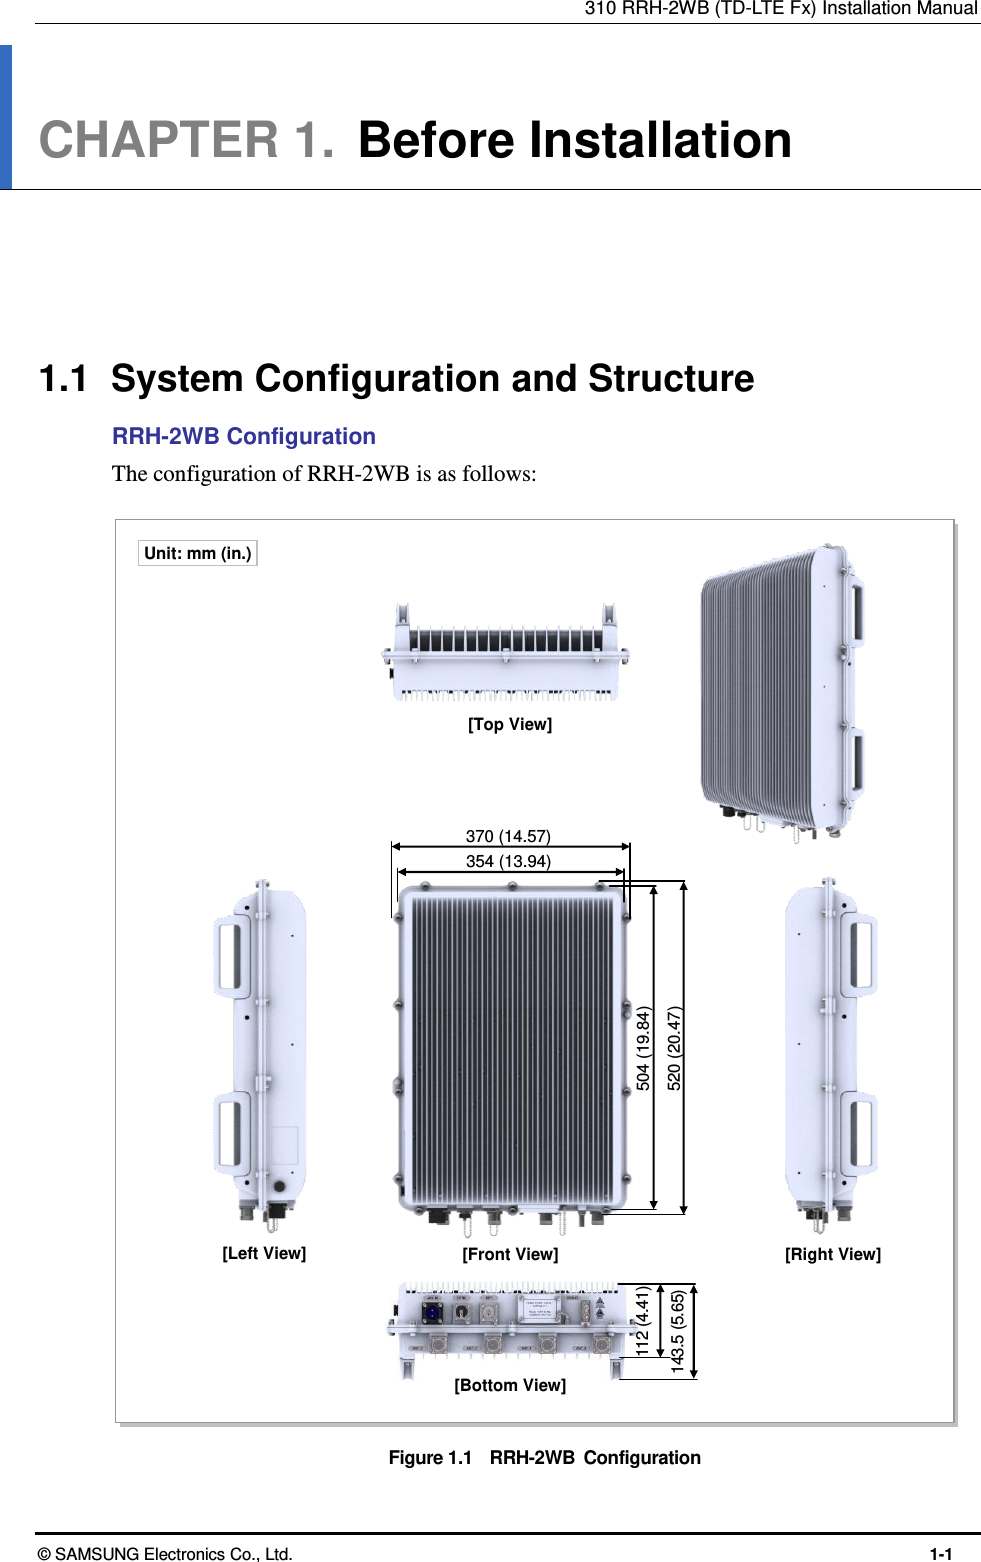 310 RRH-2WB (TD-LTE Fx) Installation Manual © SAMSUNG Electronics Co., Ltd.  1-1 CHAPTER 1.  Before Installation      1.1  System Configuration and Structure RRH-2WB Configuration The configuration of RRH-2WB is as follows:  Figure 1.1    RRH-2WB  Configuration [Bottom View] [Front View] [Right View] [Top View] [Left View] 143.5 (5.65) 354 (13.94) 370 (14.57) 504 (19.84) 520 (20.47) 112 (4.41) Unit: mm (in.) 